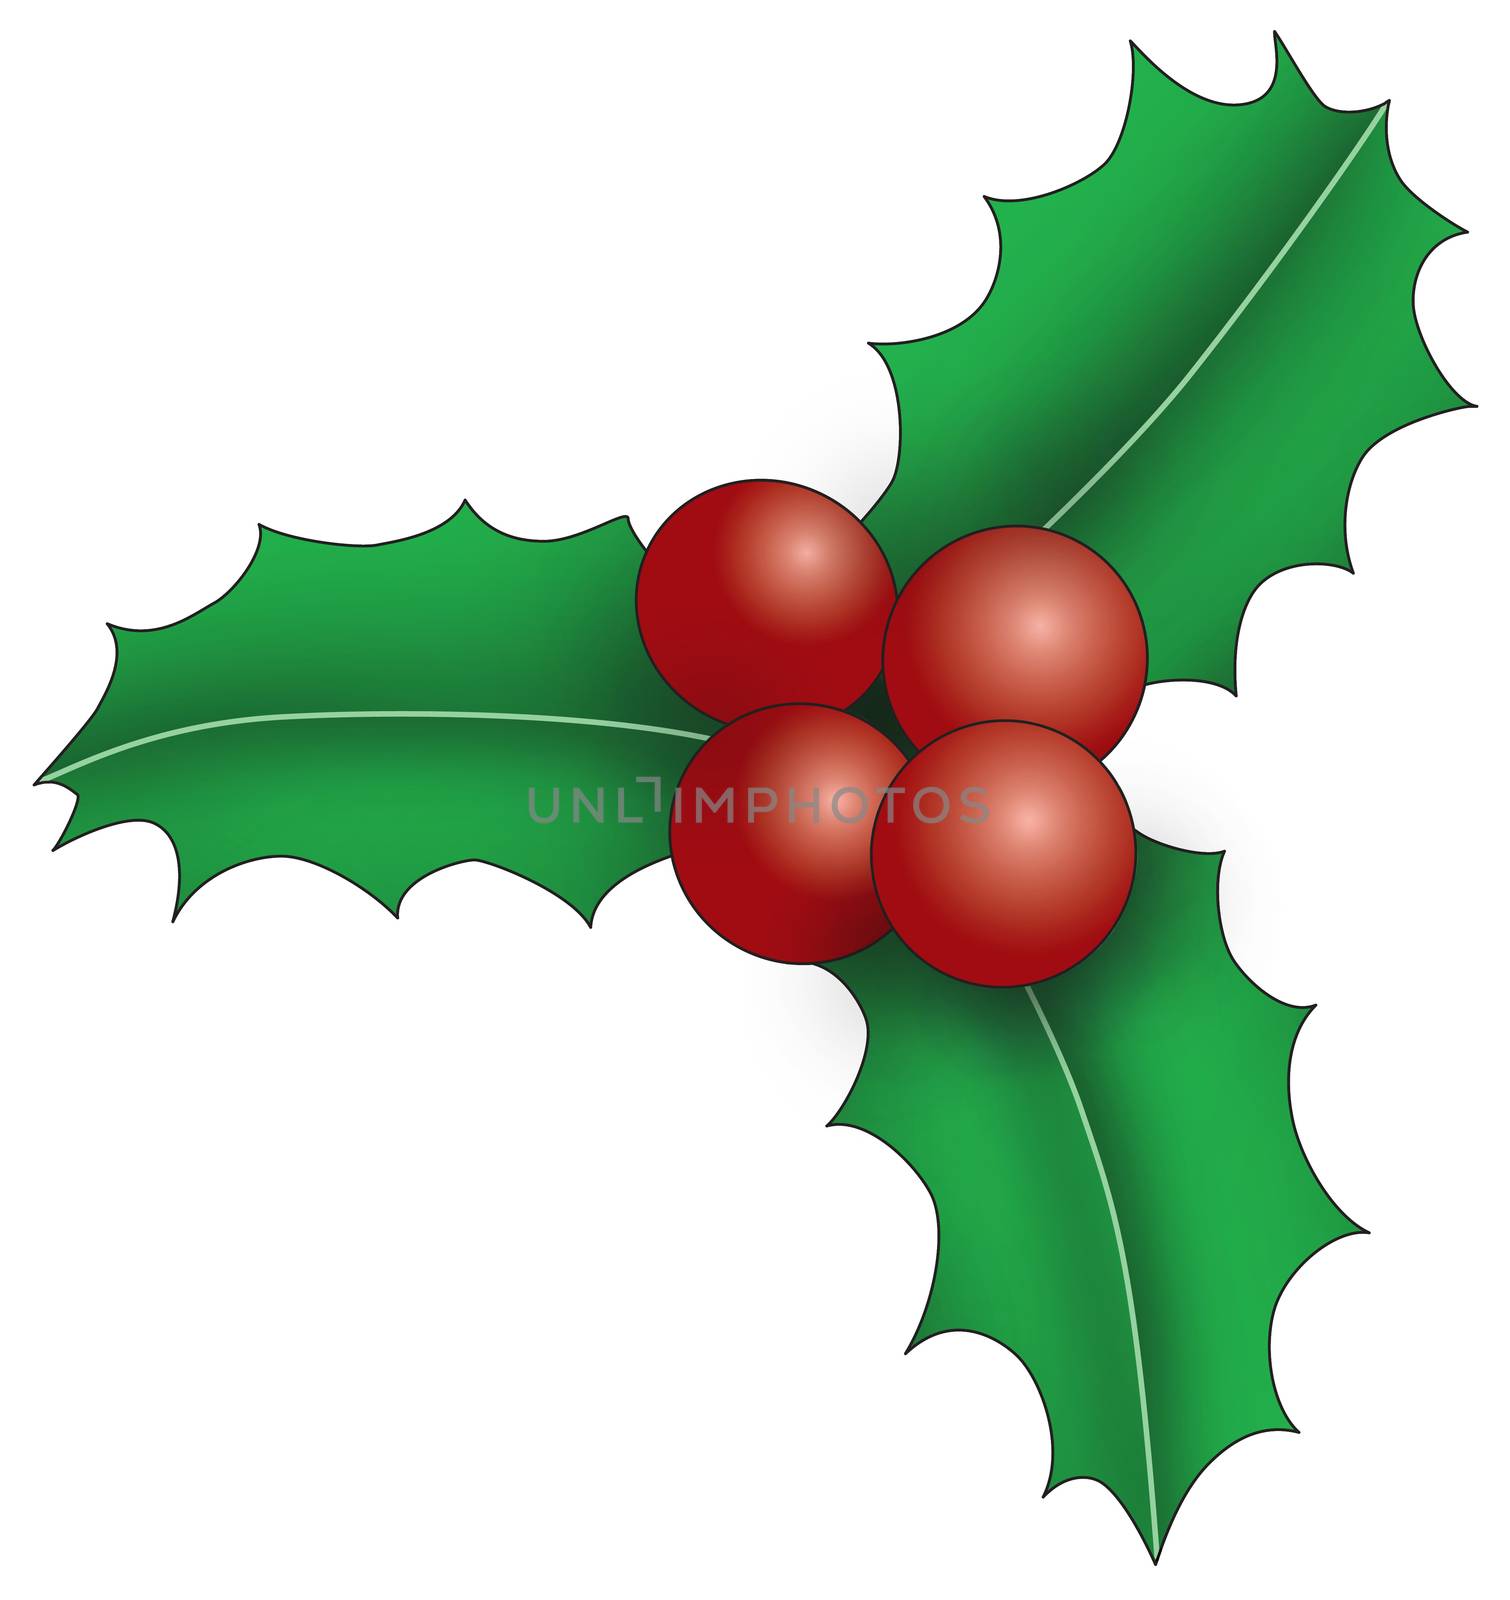 Three holly leaves with berries by Balefire9